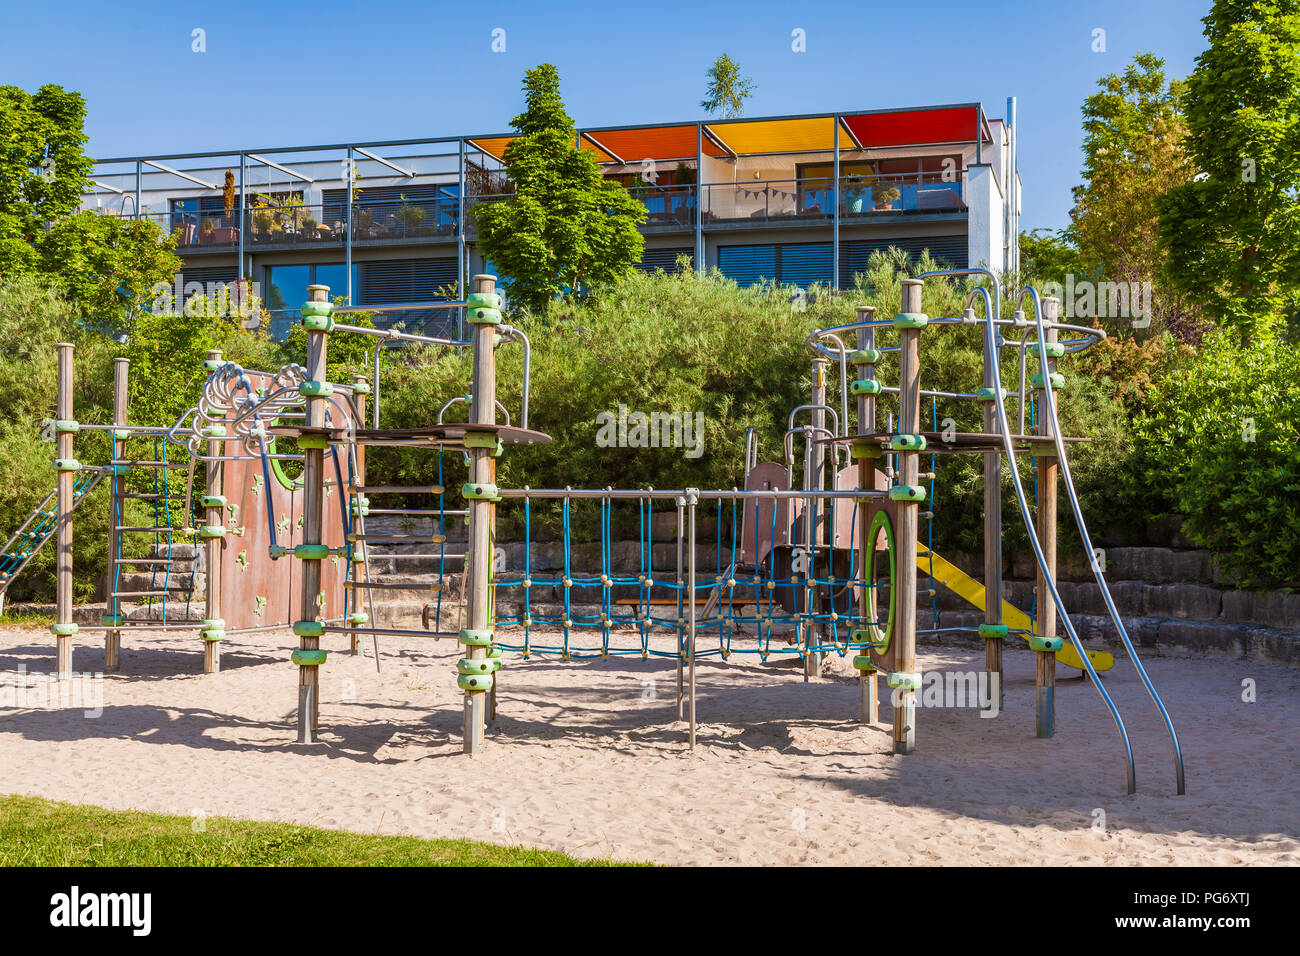 Germany, Baden-Wuerttemberg, Ulm, Eselsberg, Passive house, play ground in the foreground Stock Photo